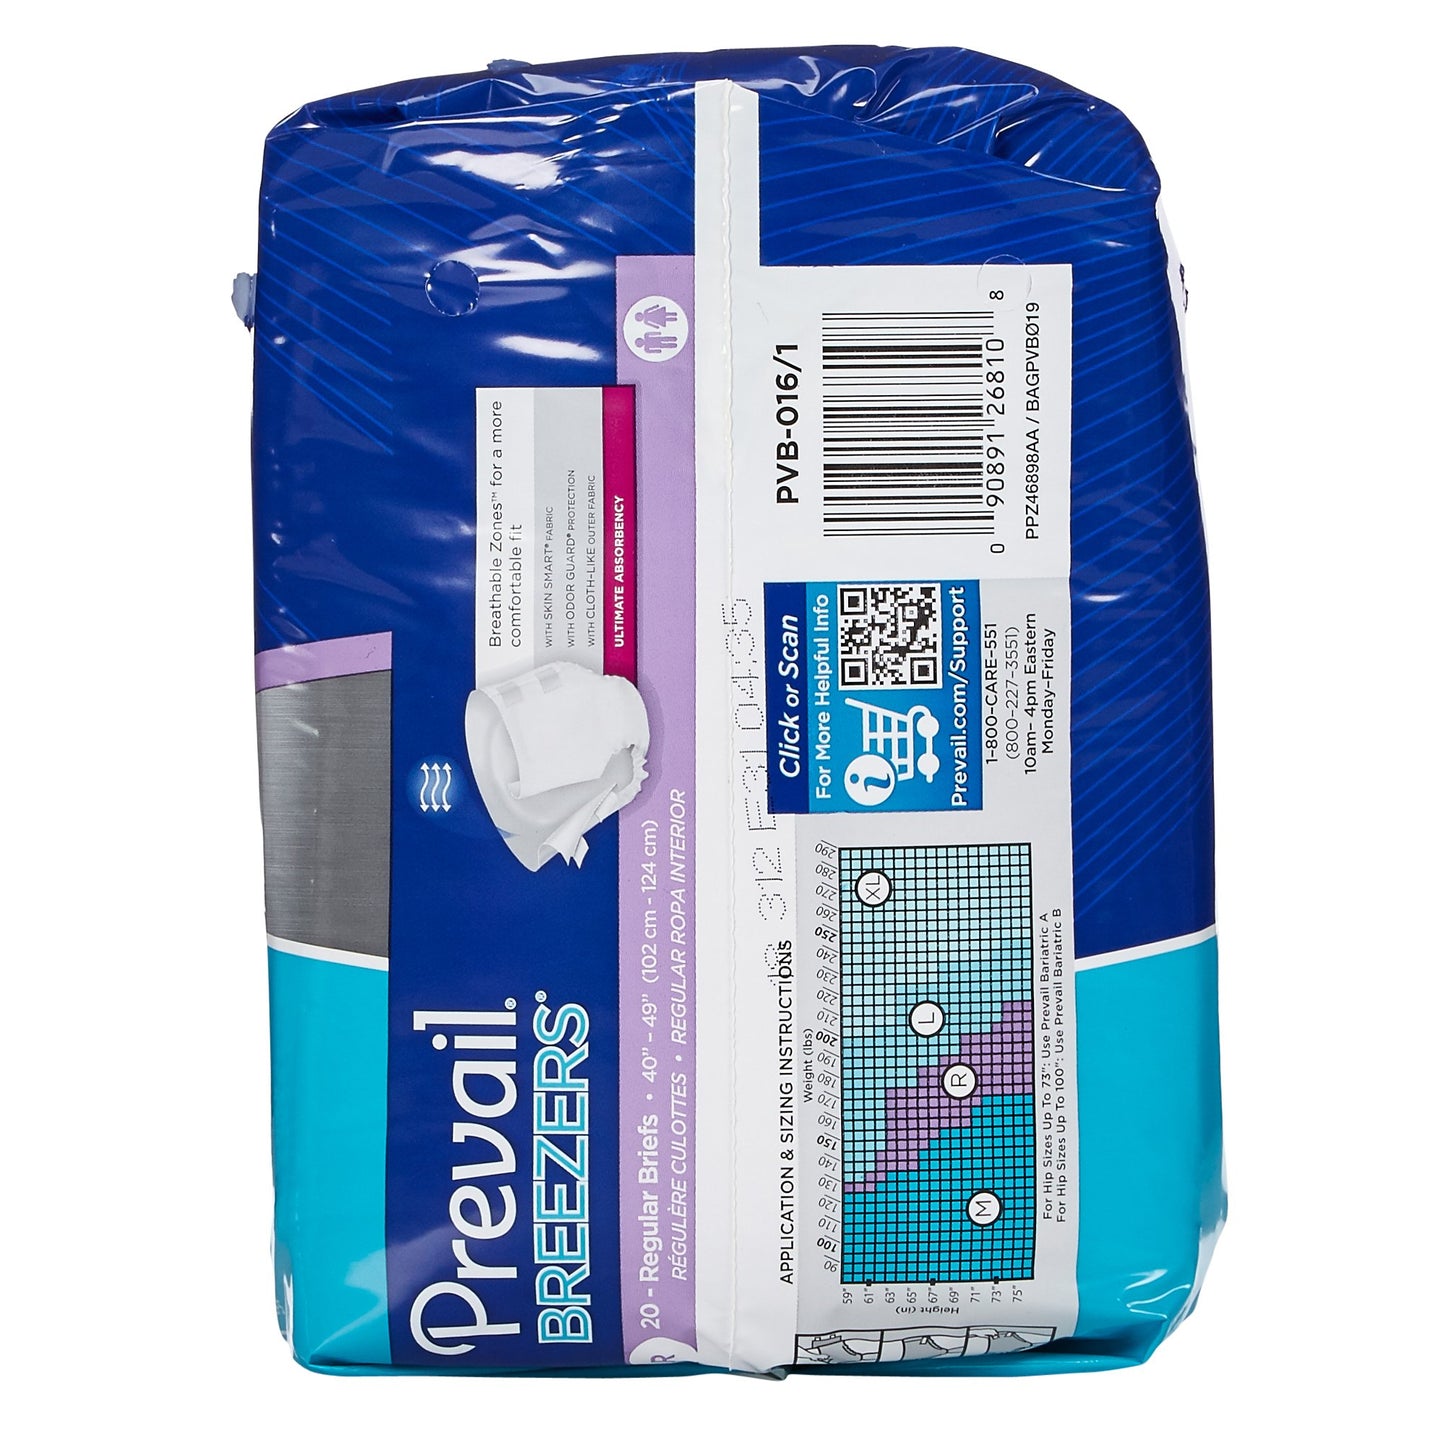 Prevail® Breezers® Ultimate Incontinence Brief, Regular, 20 ct